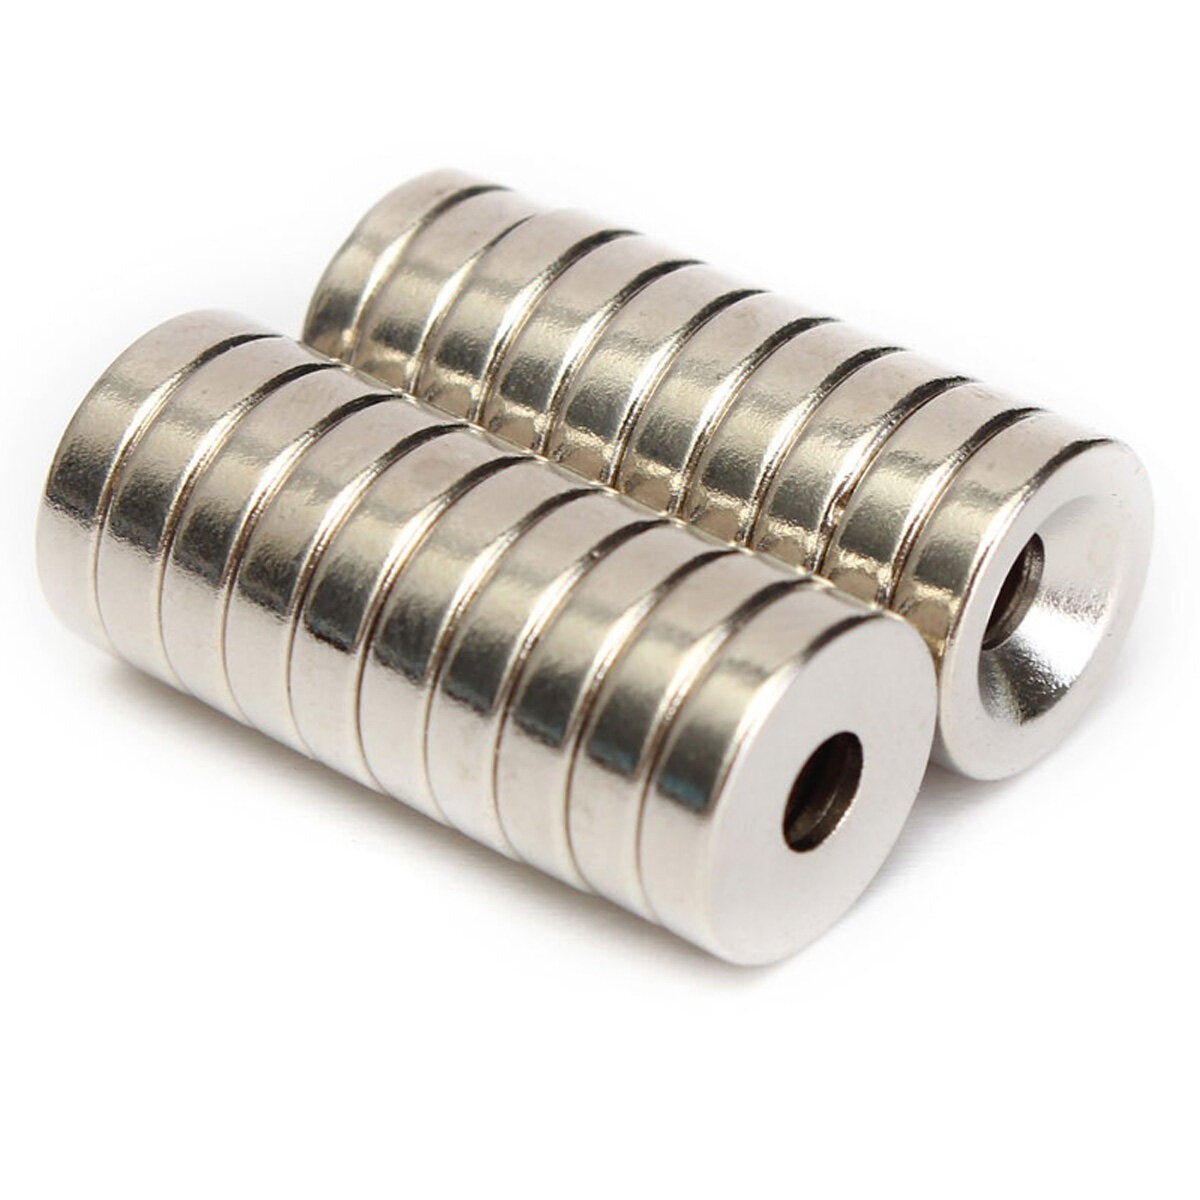 20pcs Super Strong Neodymium Magnets With Hole - Perfect for Tool